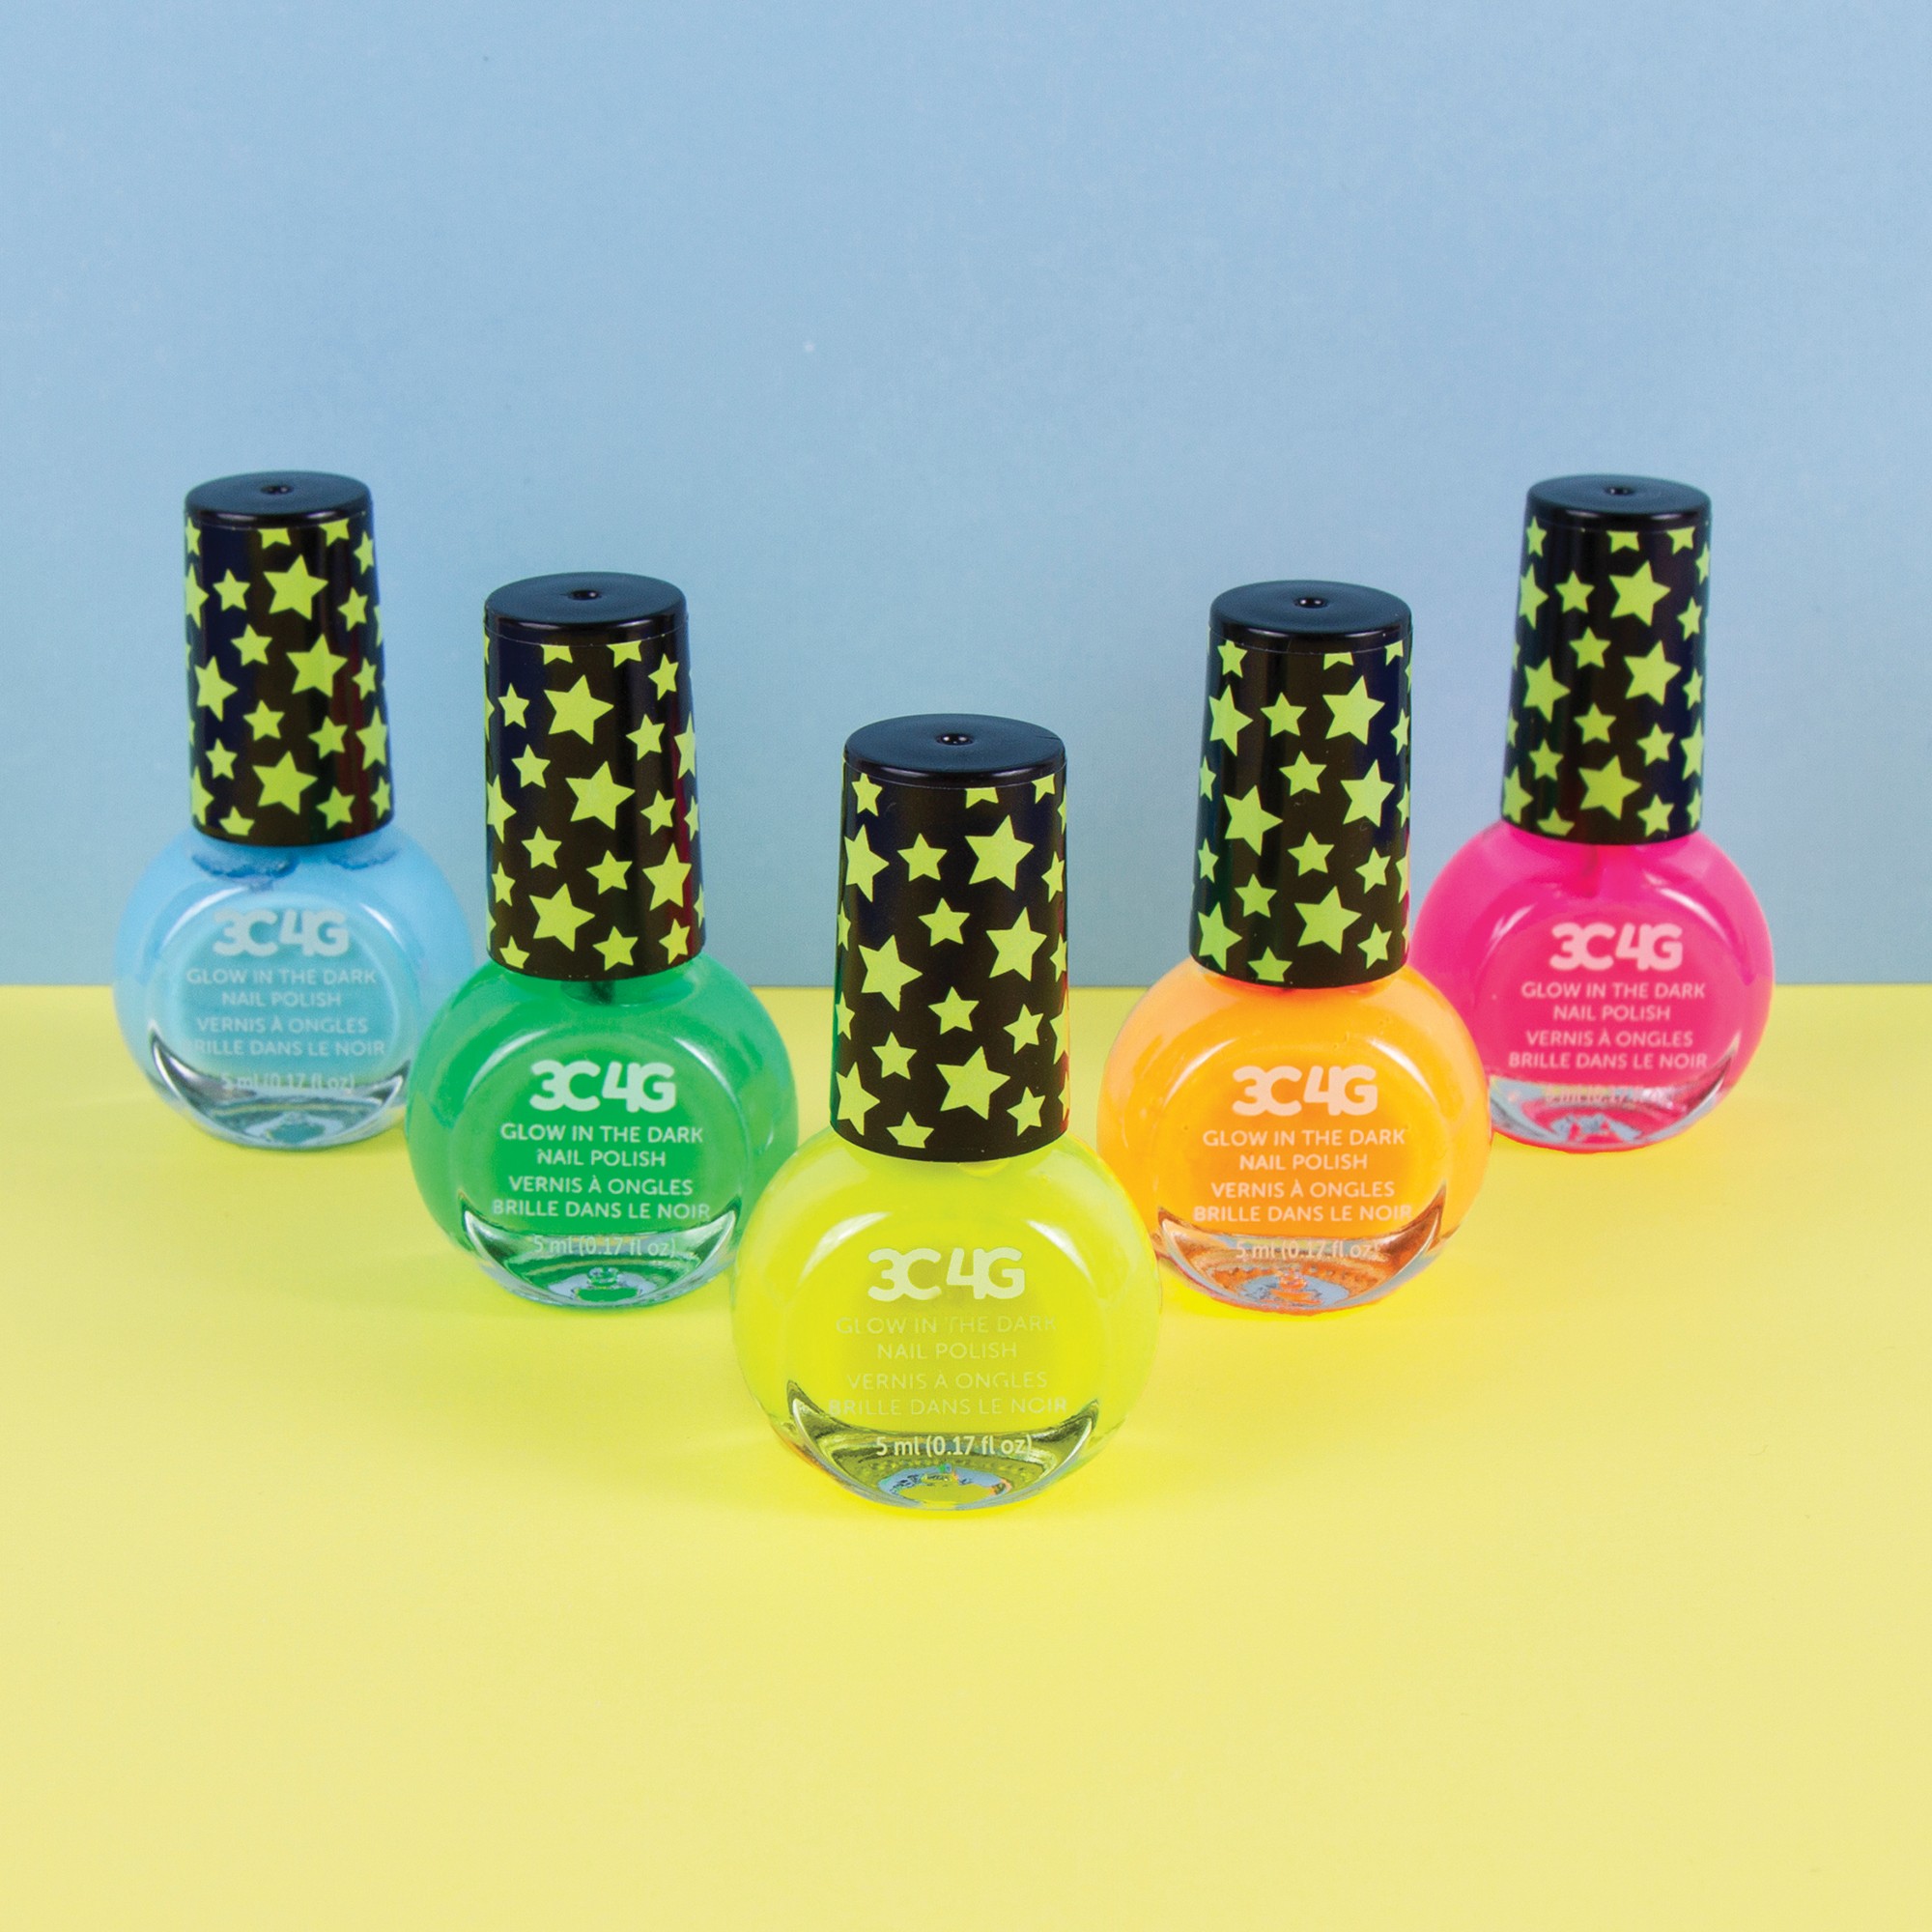 3C4G: Glow In The Dark Nail Polish Set - 5 Bottles, Make It Real, Teens  Tweens & Girls, Non-Toxic Long-Lasting Polish, Vibrant Neon Colors, Glow  Wherever You Go, Three Cheers For Girls